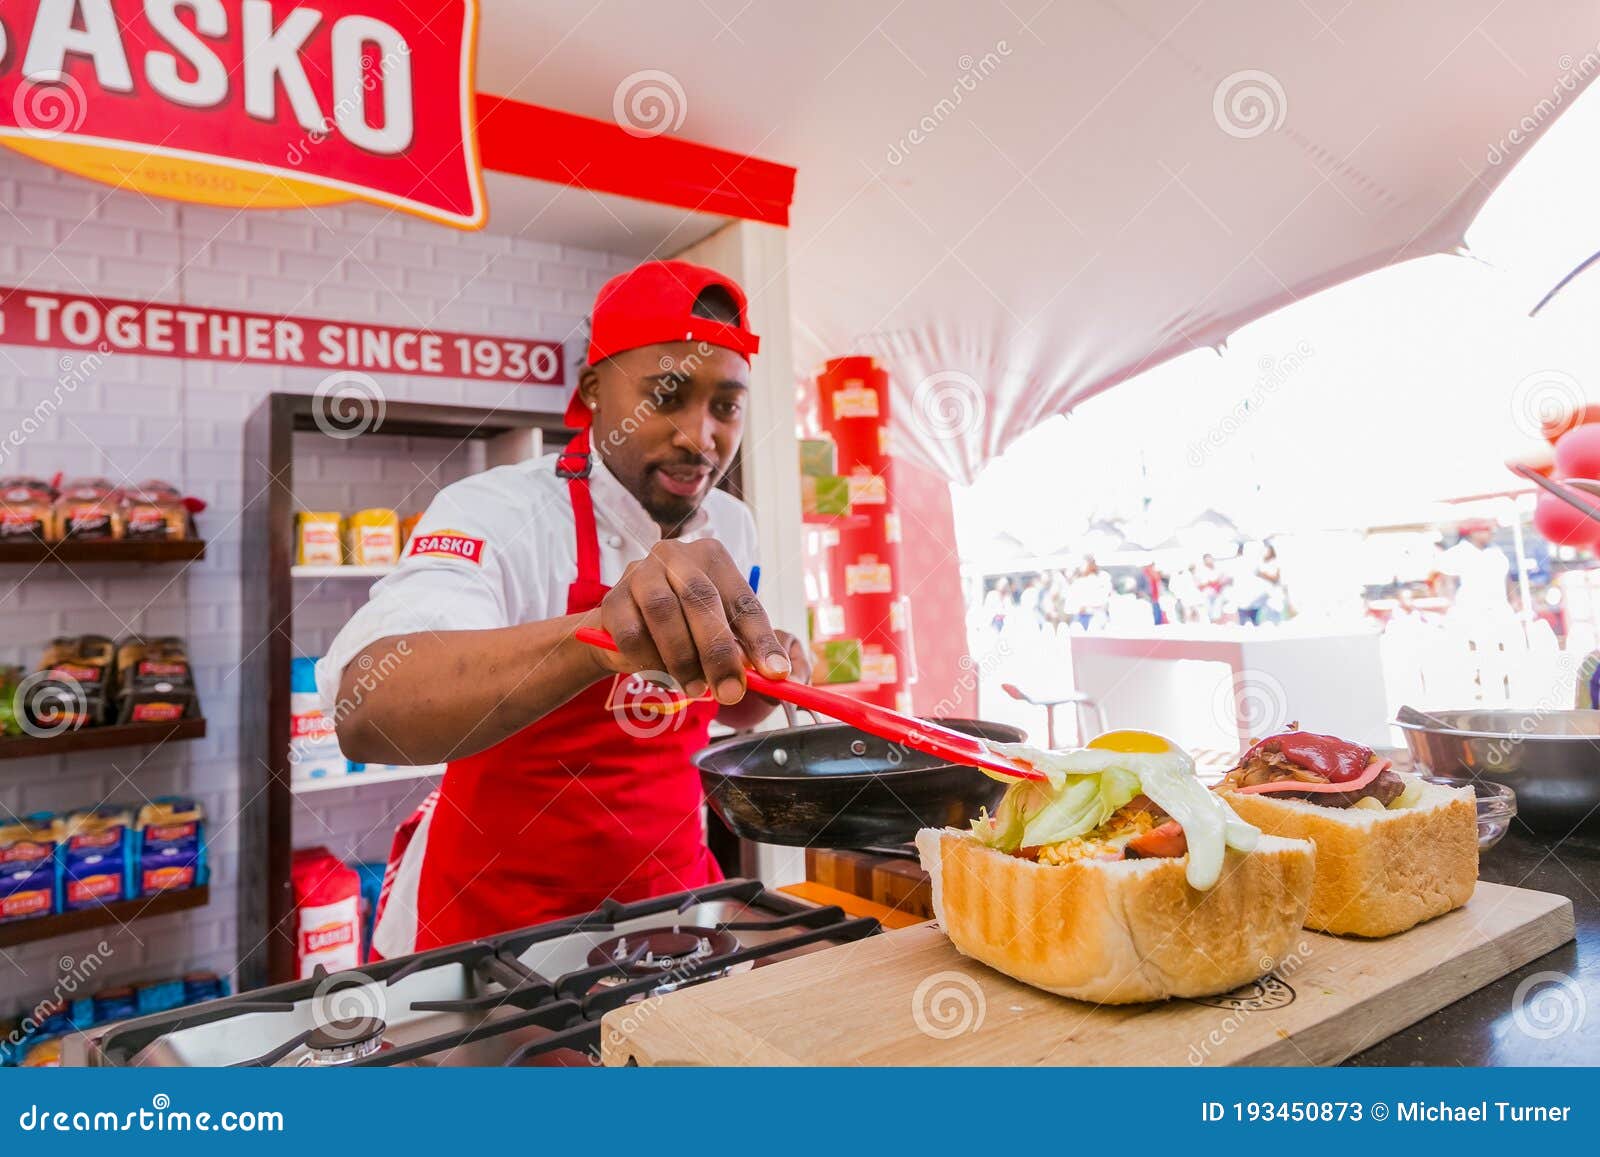 Professional Chefs Cooking And Preparing Street Food Called Bunny Chow At Food Festival ...